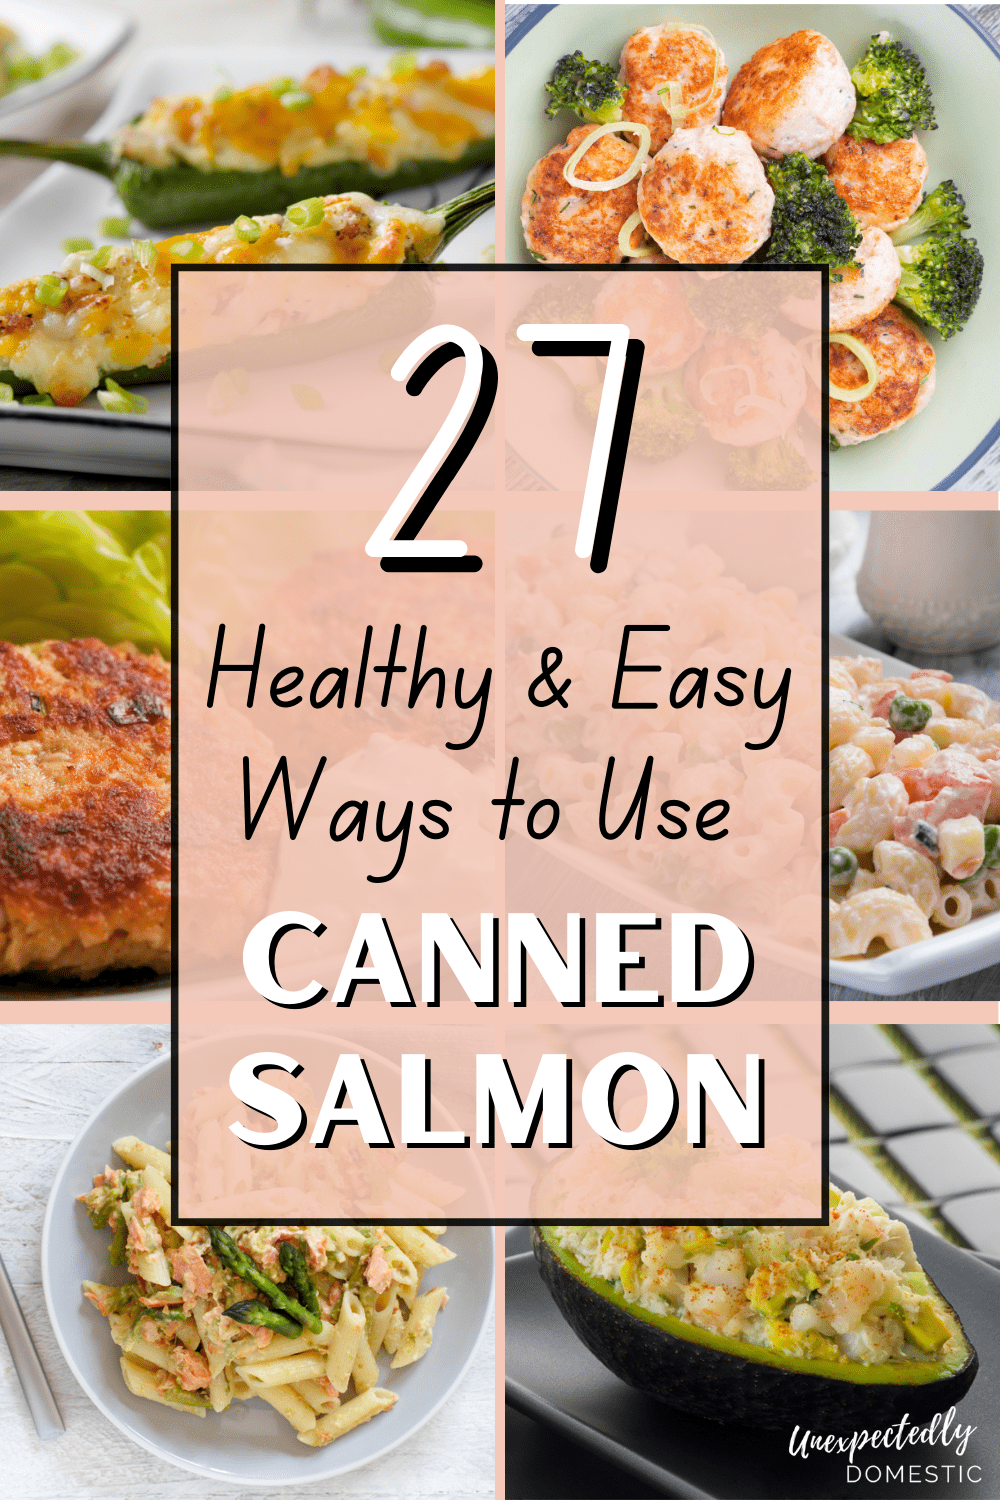 Easy and healthy canned salmon recipes! These quick and easy recipes using canned salmon make quick and easy lunch ideas, a healthy snack, or light dinner.